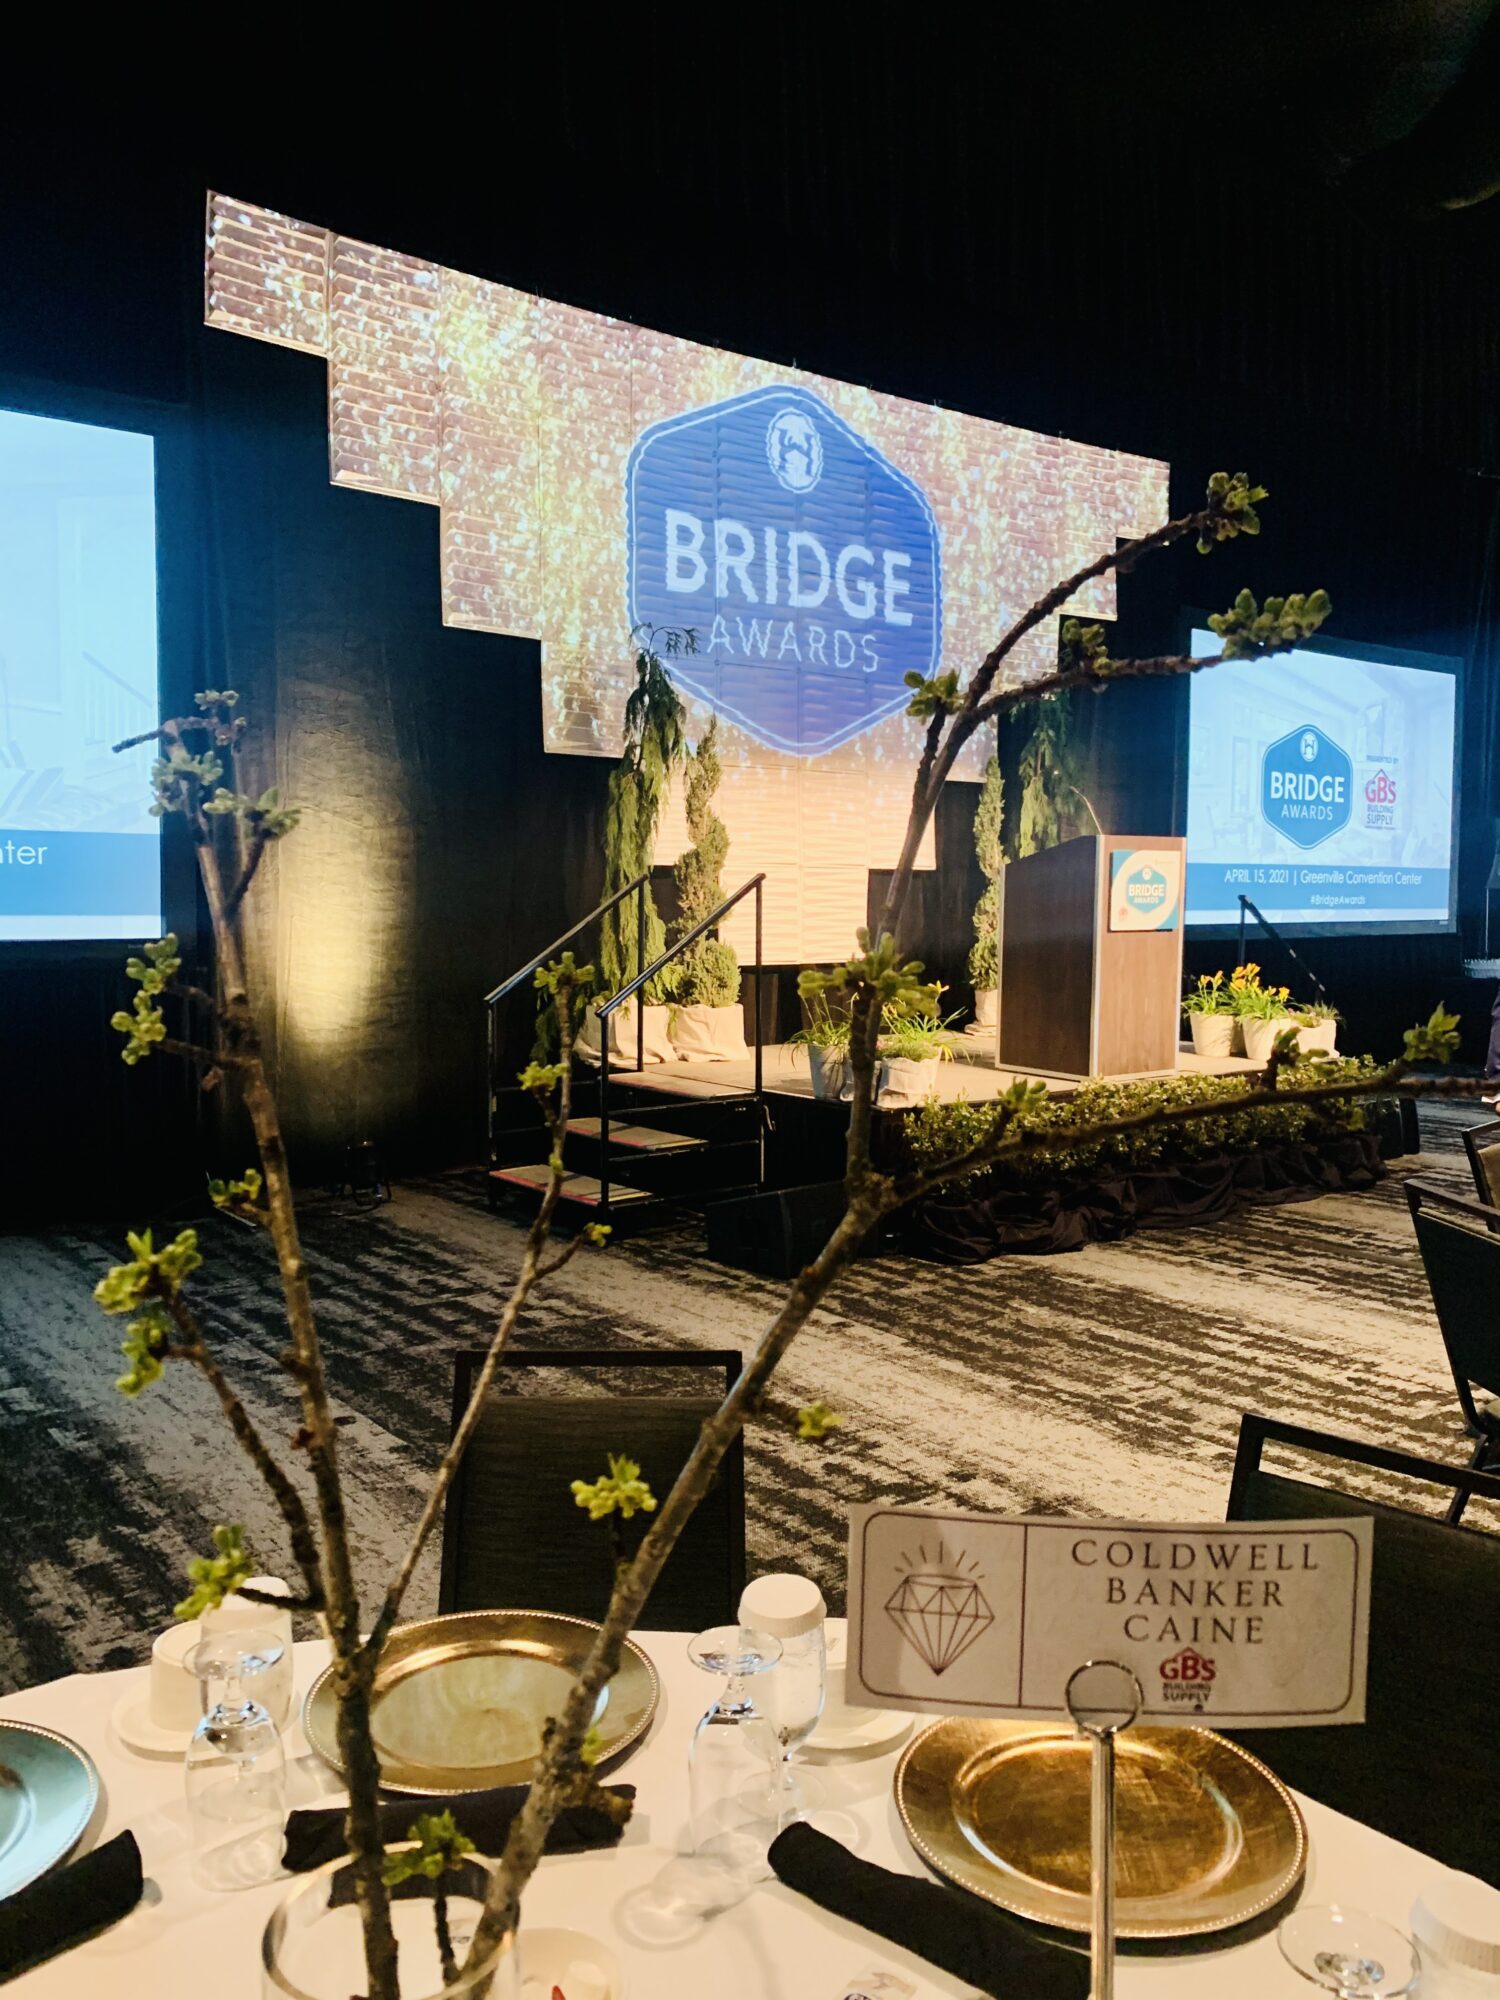 Coldwell Banker Caine and BLUE Division Partners Receive HBA Bridge Awards for 2020 Performances